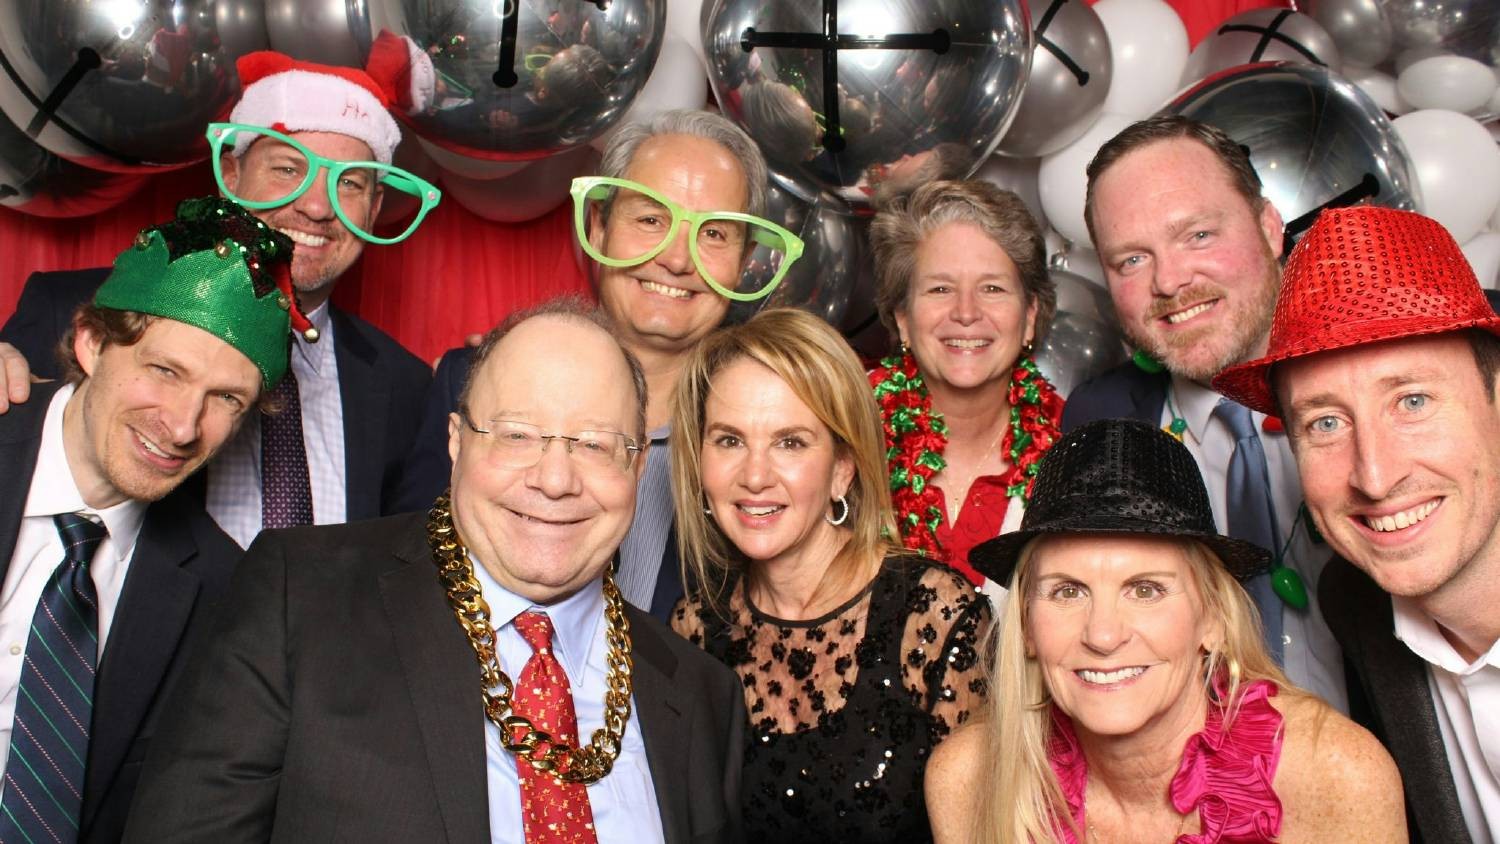 Members of the Credigy team celebrated the close of a great year at our fabulous holiday party and charity fundraiser.